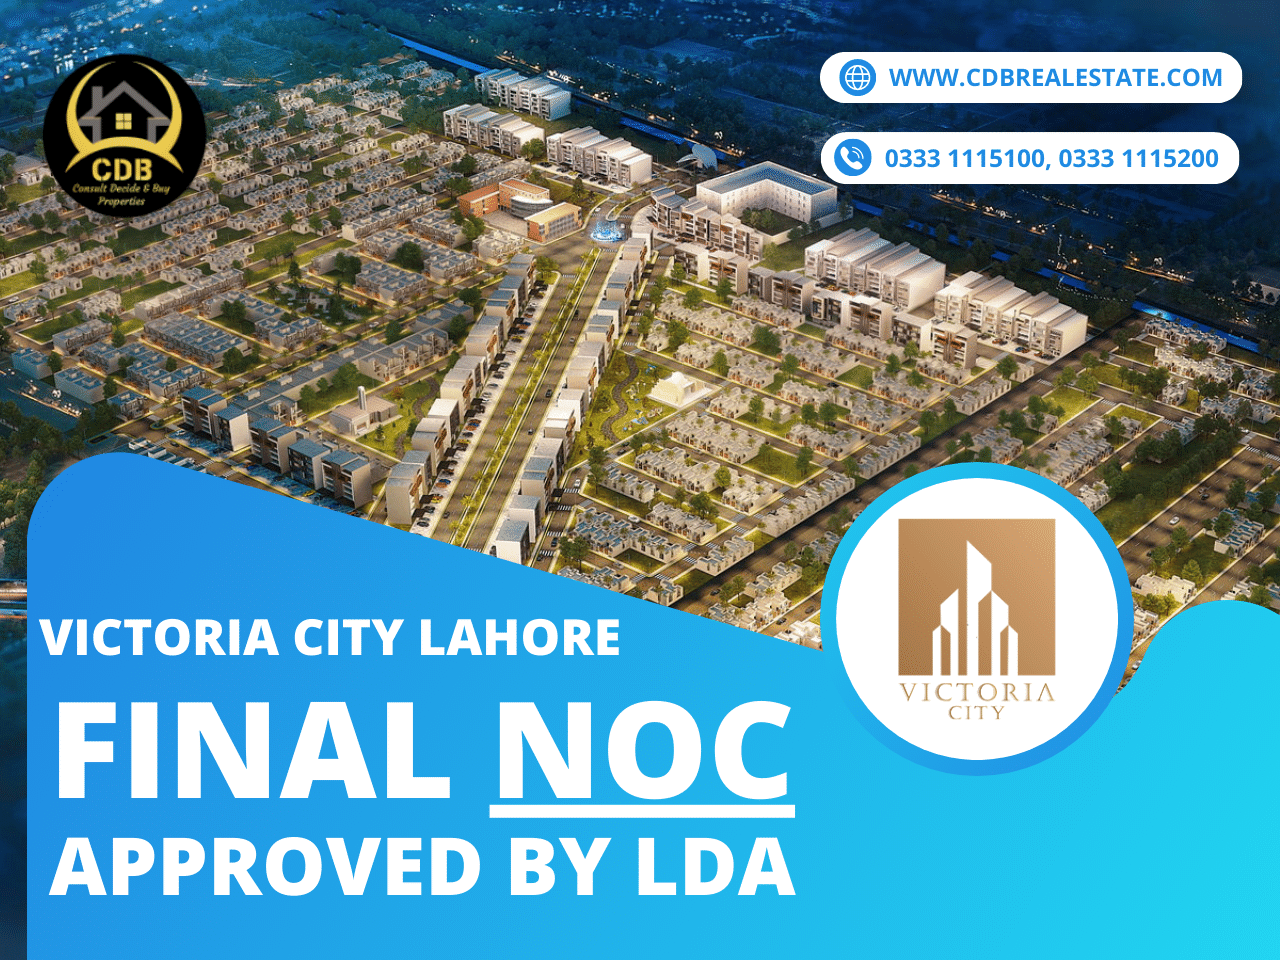 Victoria City Lahore Final NOC Approved By LDA